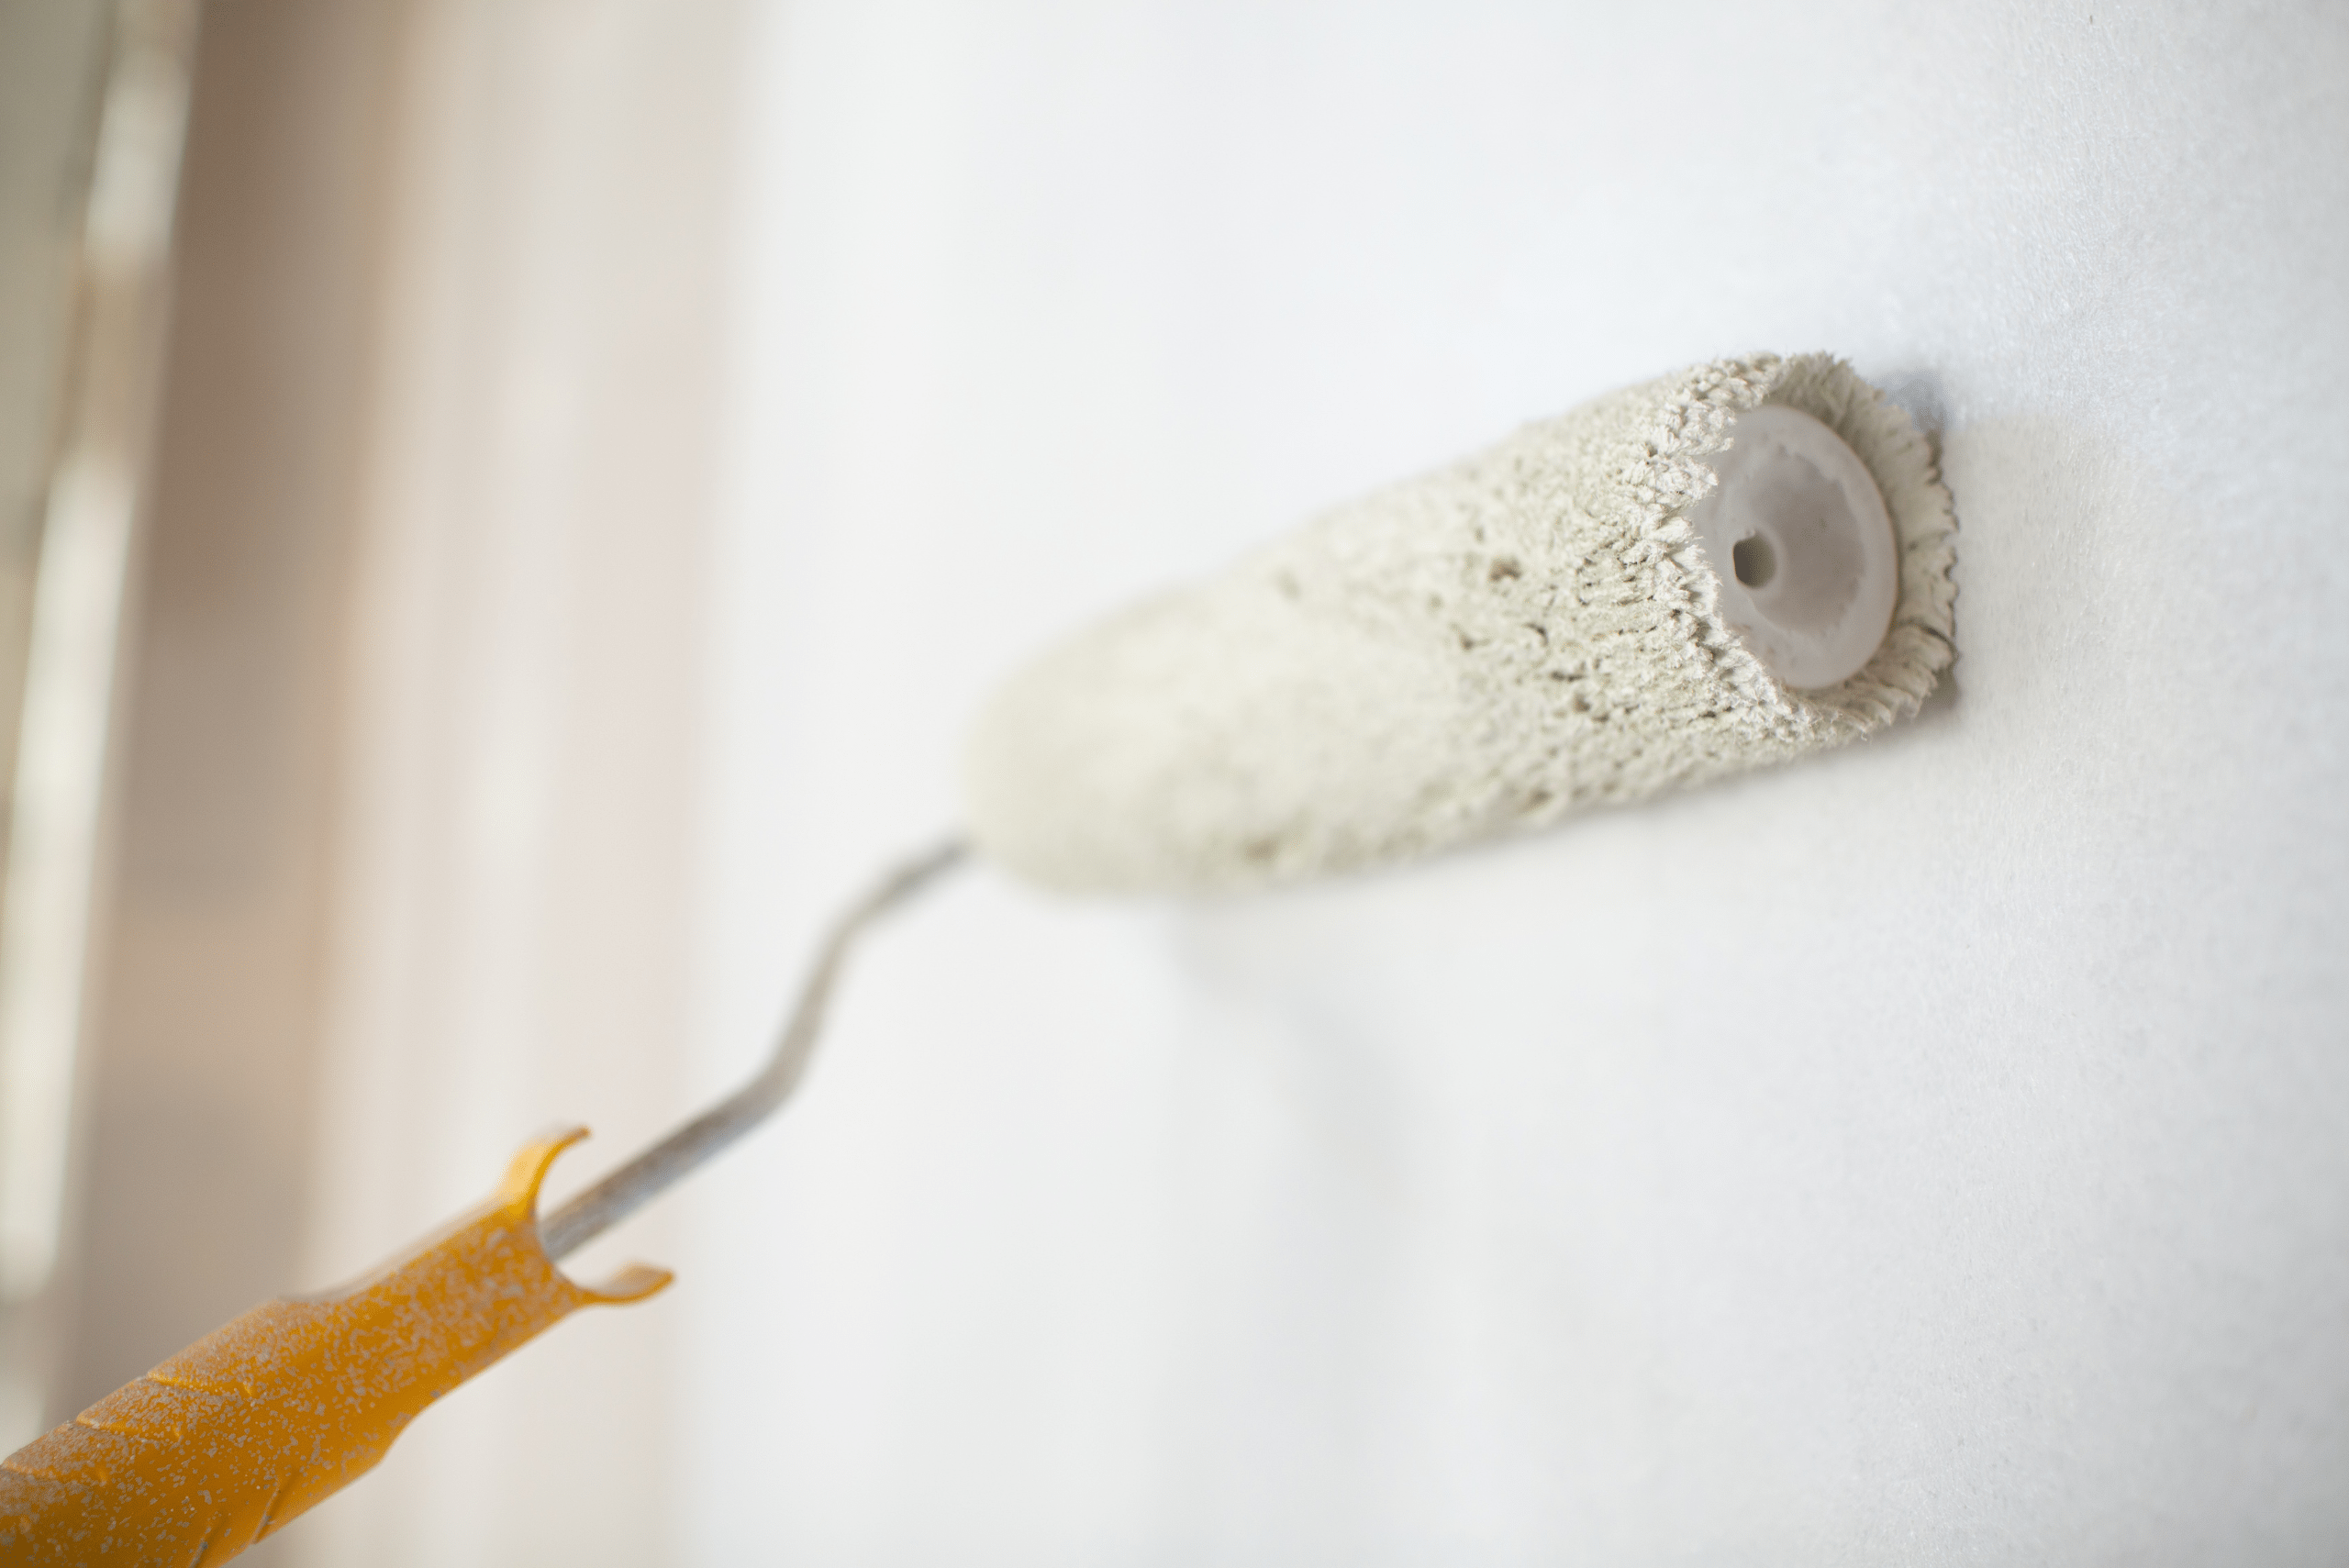 A paint roller on the wall.